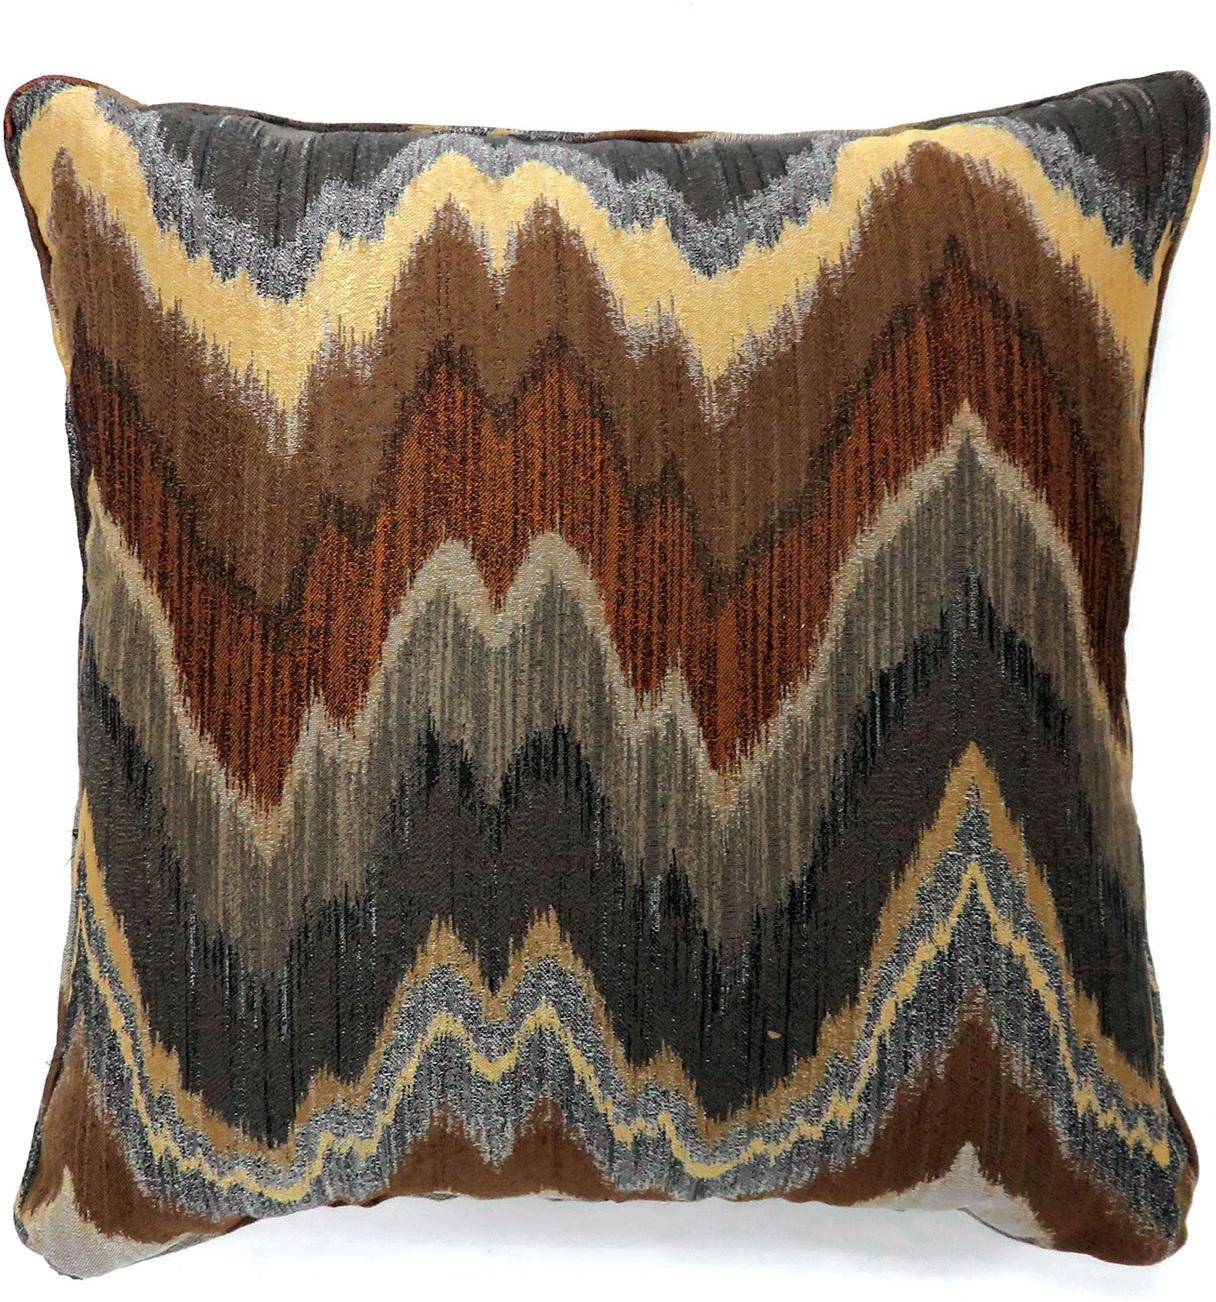 Contemporary Throw Pillow PL6008-2PK-S Seismy PL6008-2PK-S in Brown 